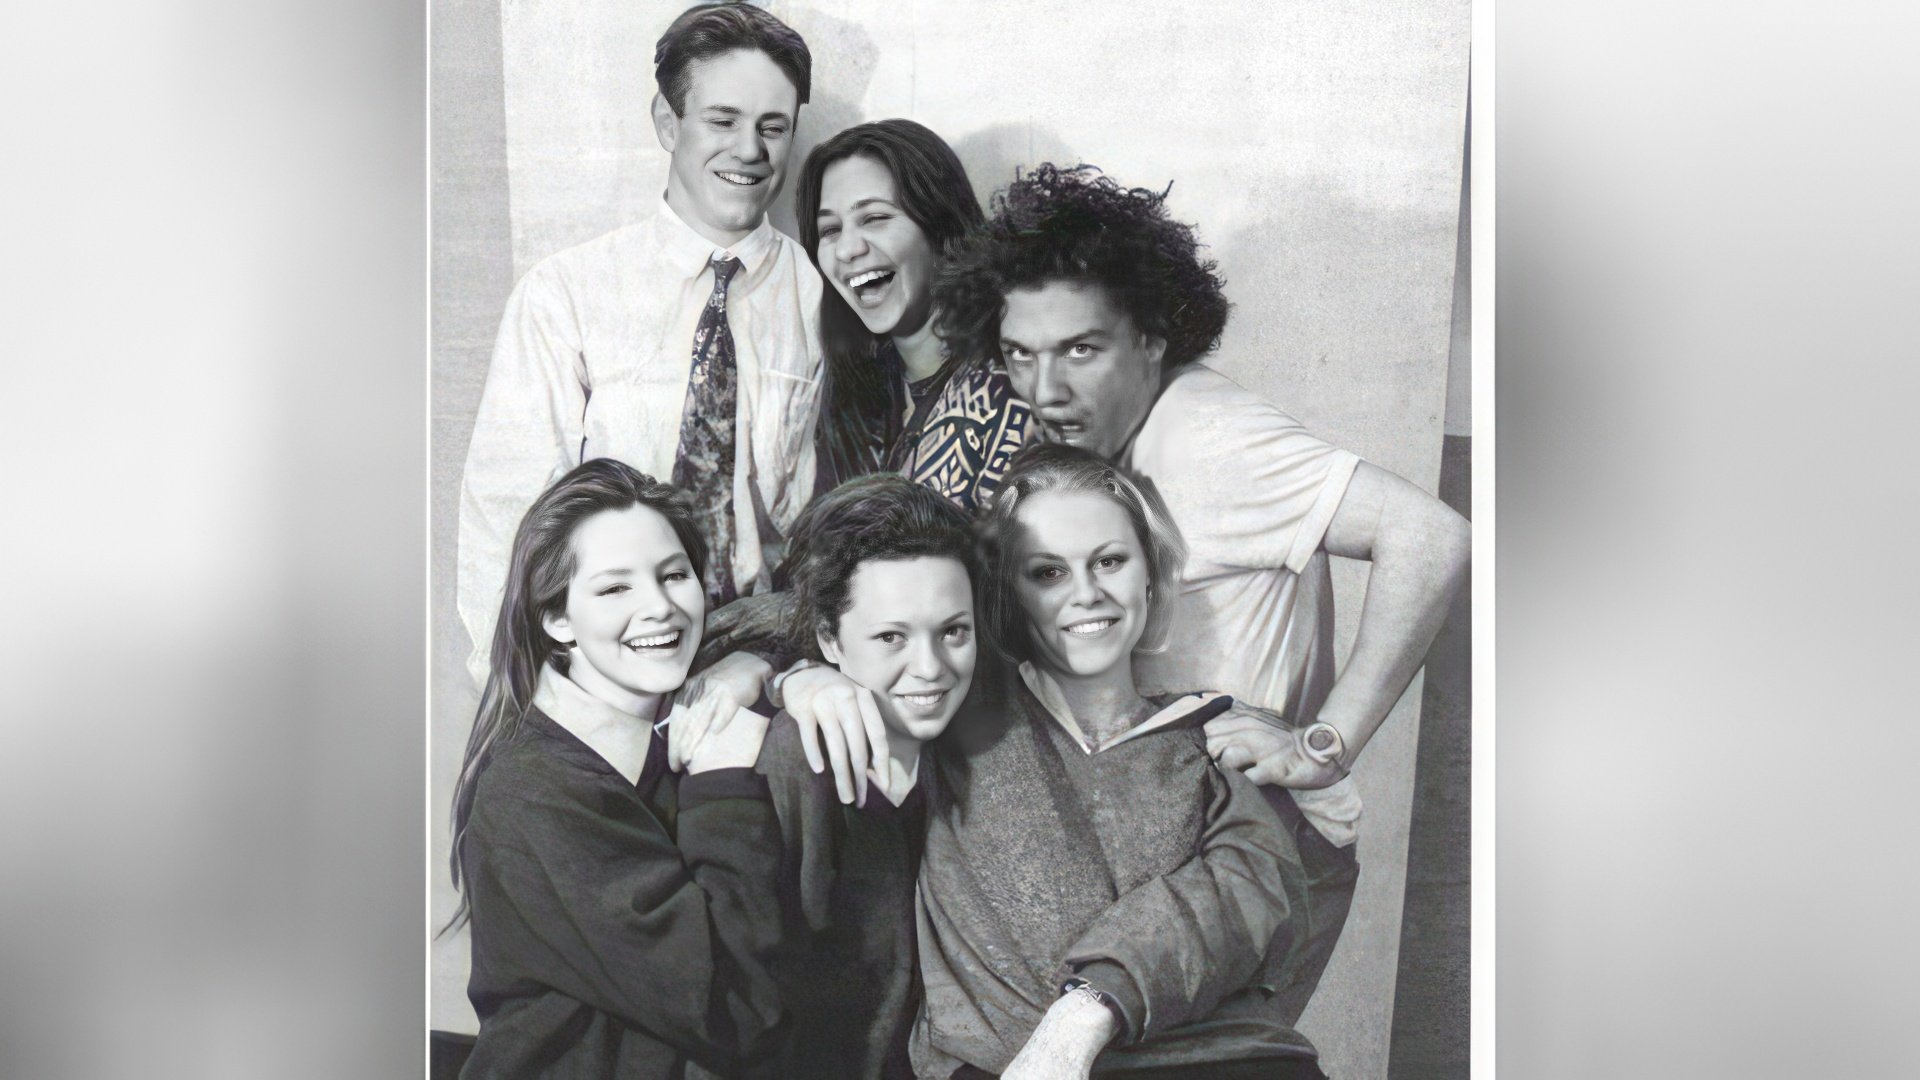 Olivia Colman (in the middle) with her classmates from Gresham’s (1992)